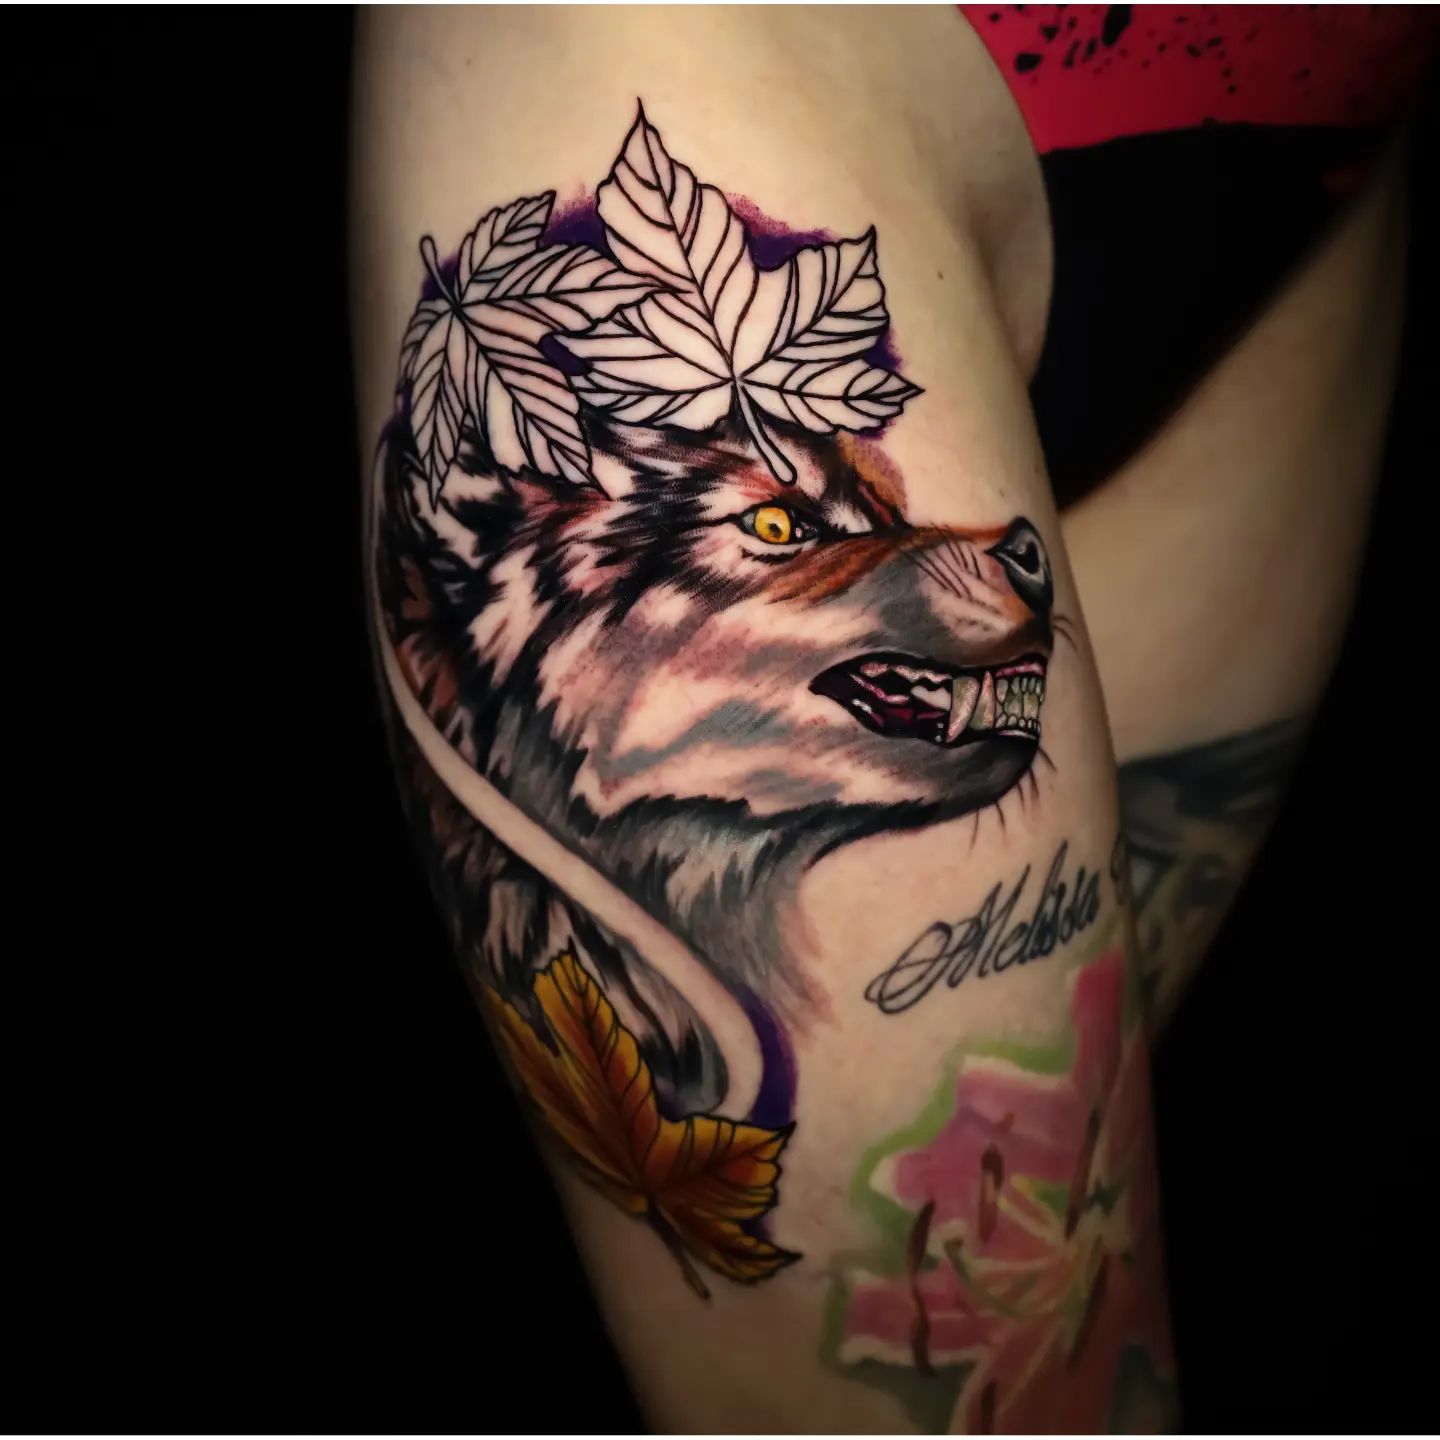 This wolf tattoo will take 3-5 hours to do.